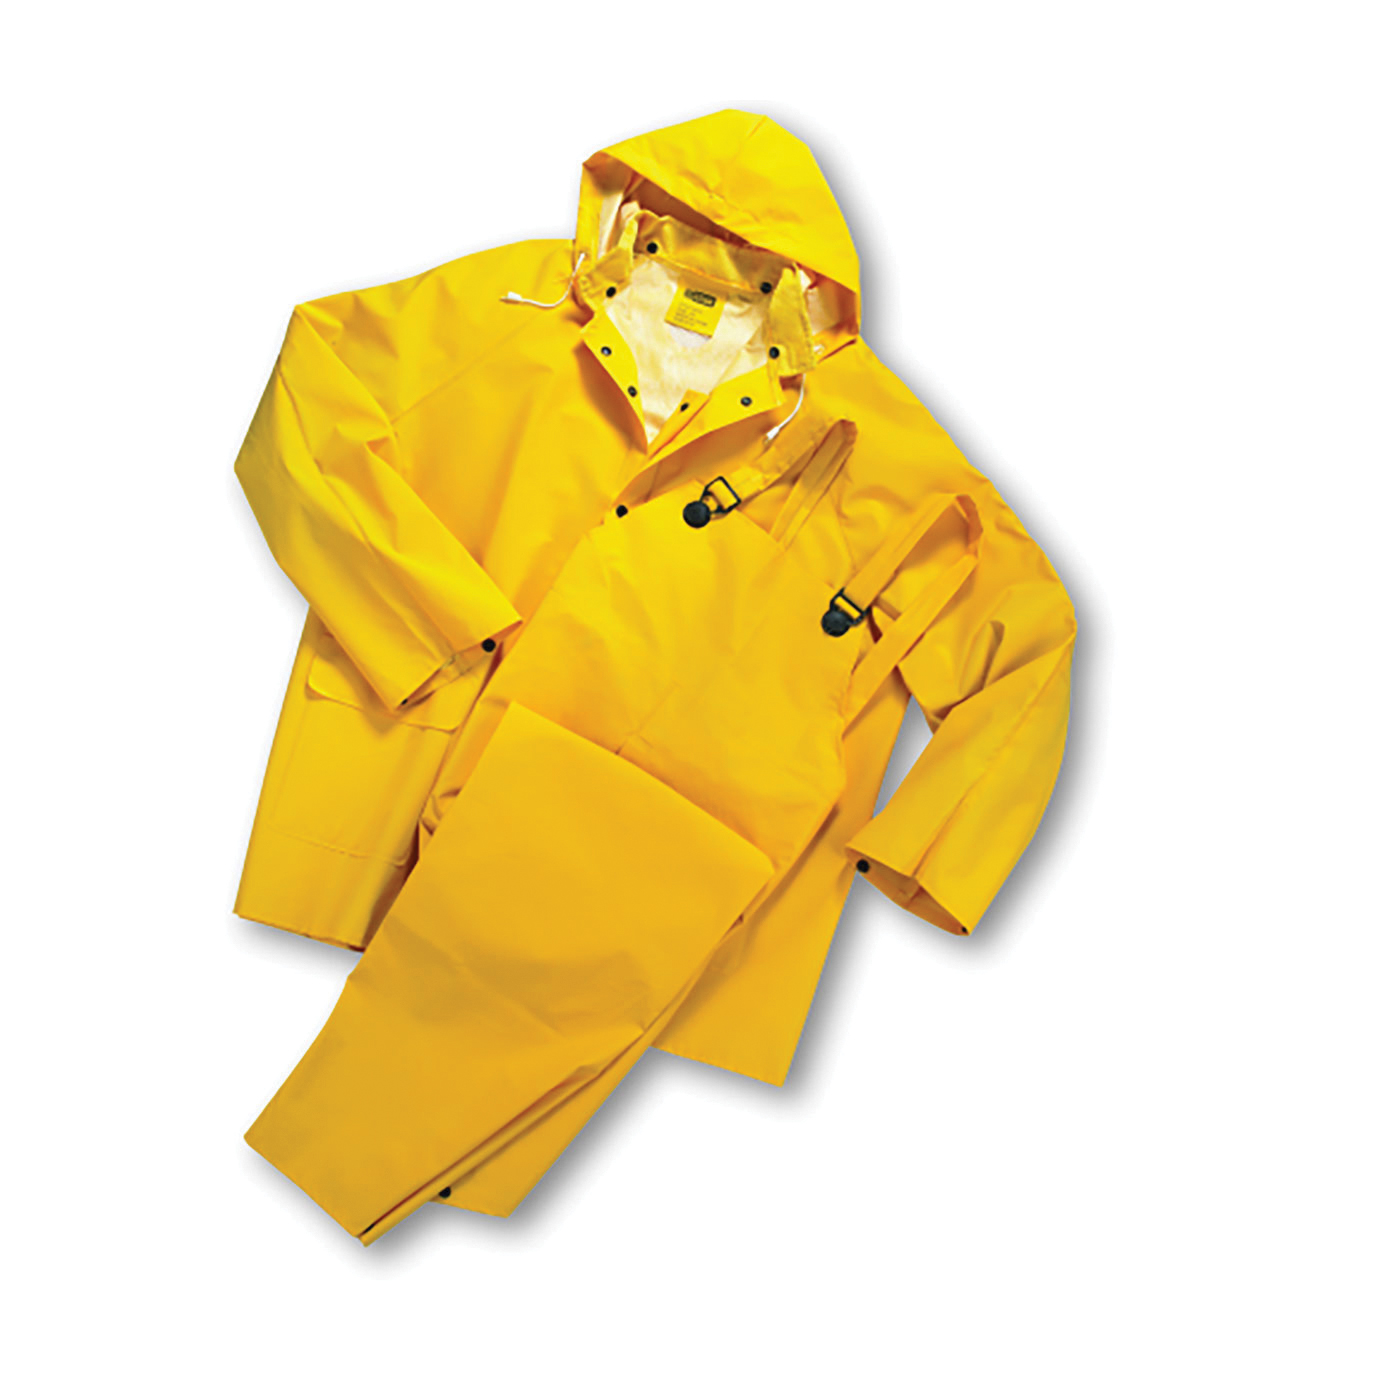 PIP® 4035/S 3-Piece Rainsuit, S, Yellow, Polyester/PVC, 44 in Waist, 29-1/2 in L Inseam, Drawstring Hood